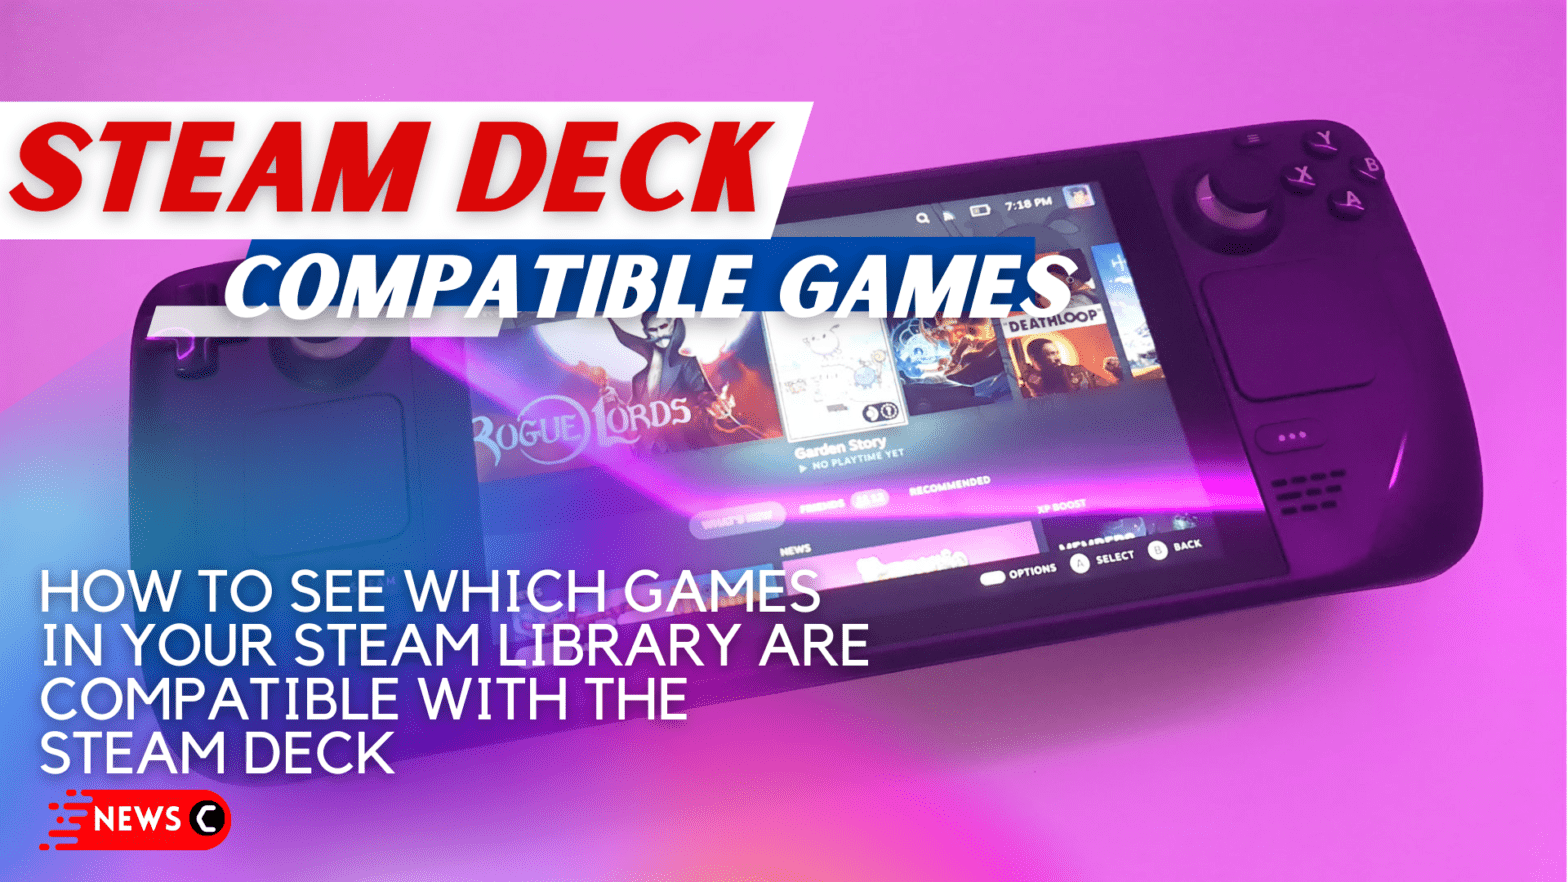 How To See Which Games In Your Steam Library Are Compatible With The Steam Deck